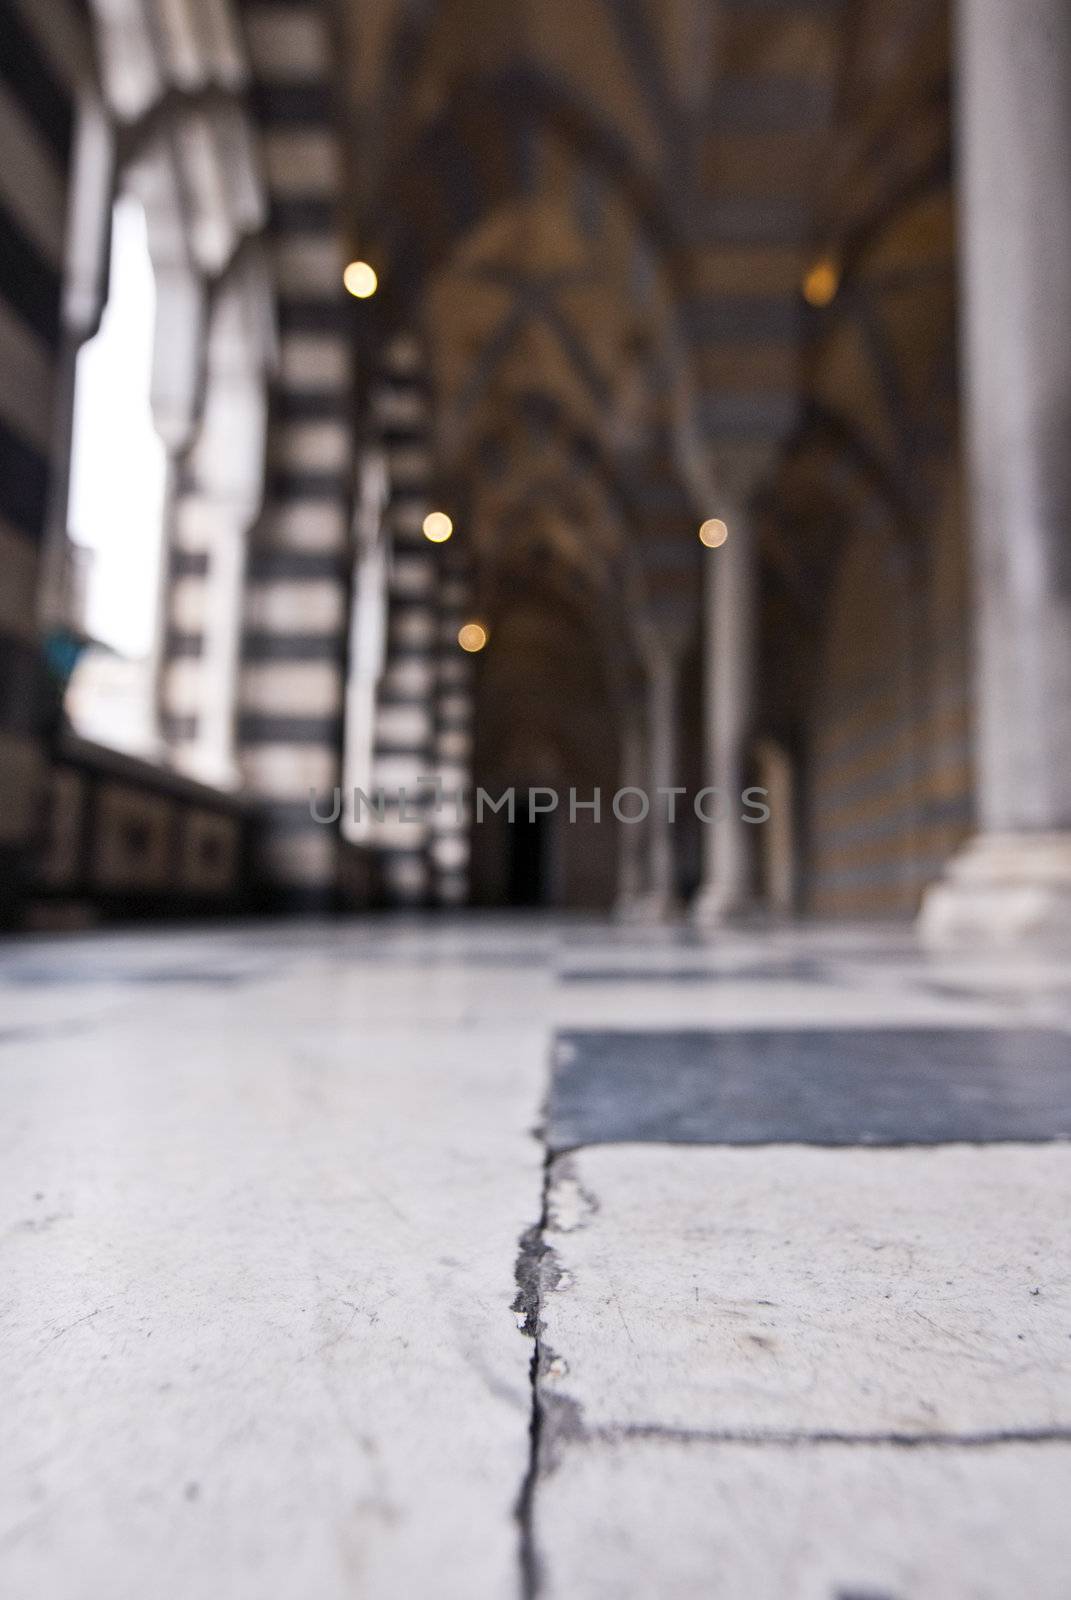 patterned architecture columns and floor amalfi, italy with tour group in background by itsrich